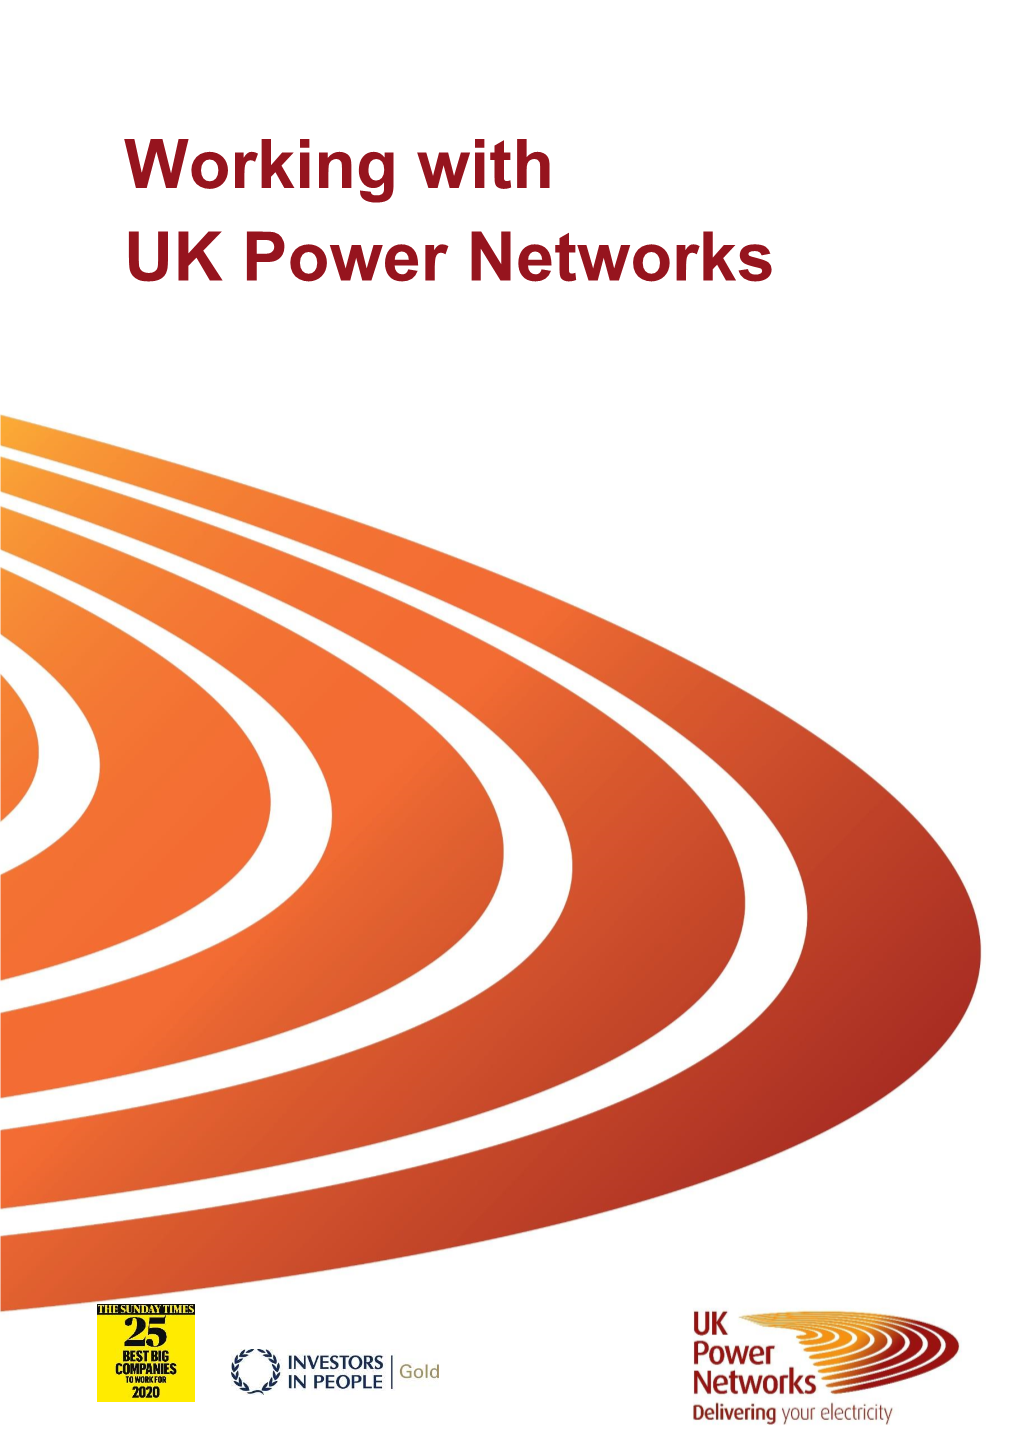 Working with UK Power Networks